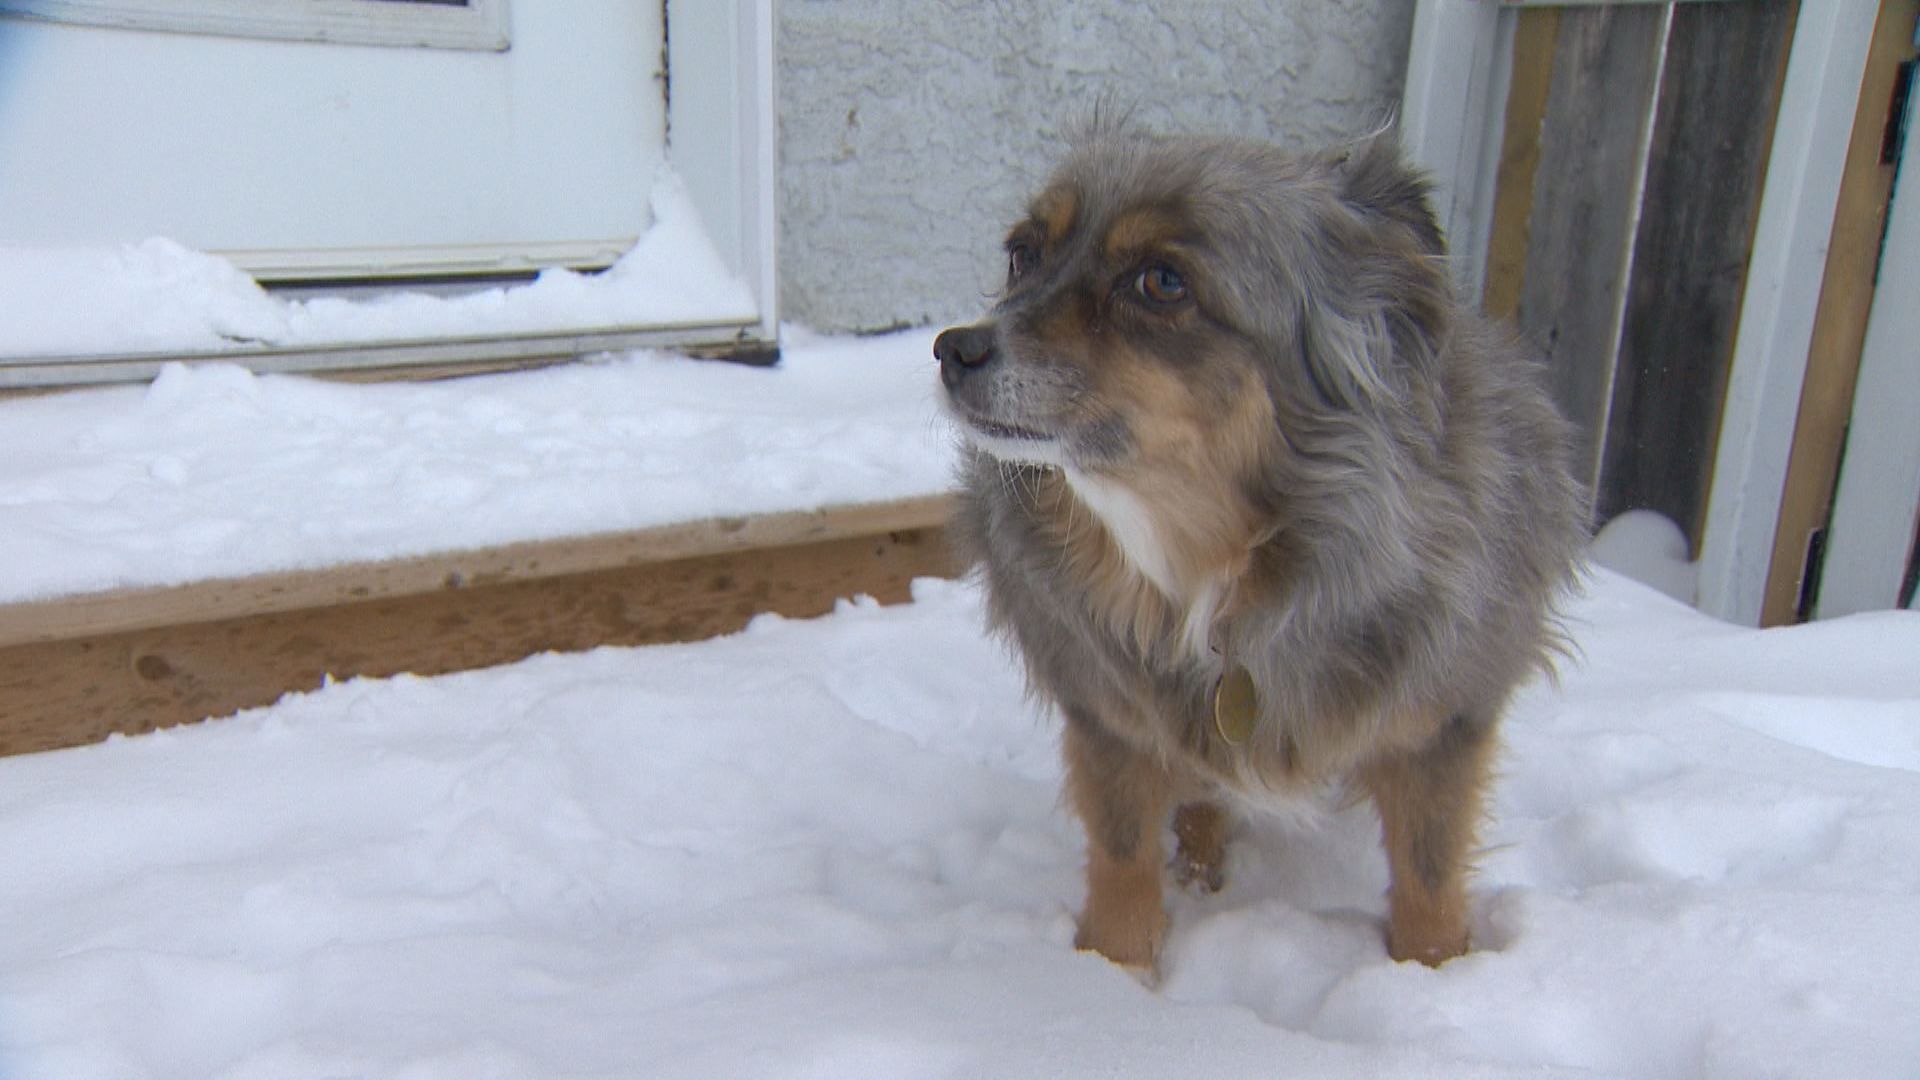 Calgary pet owners reminded to limit outdoor exposure during extreme cold snap